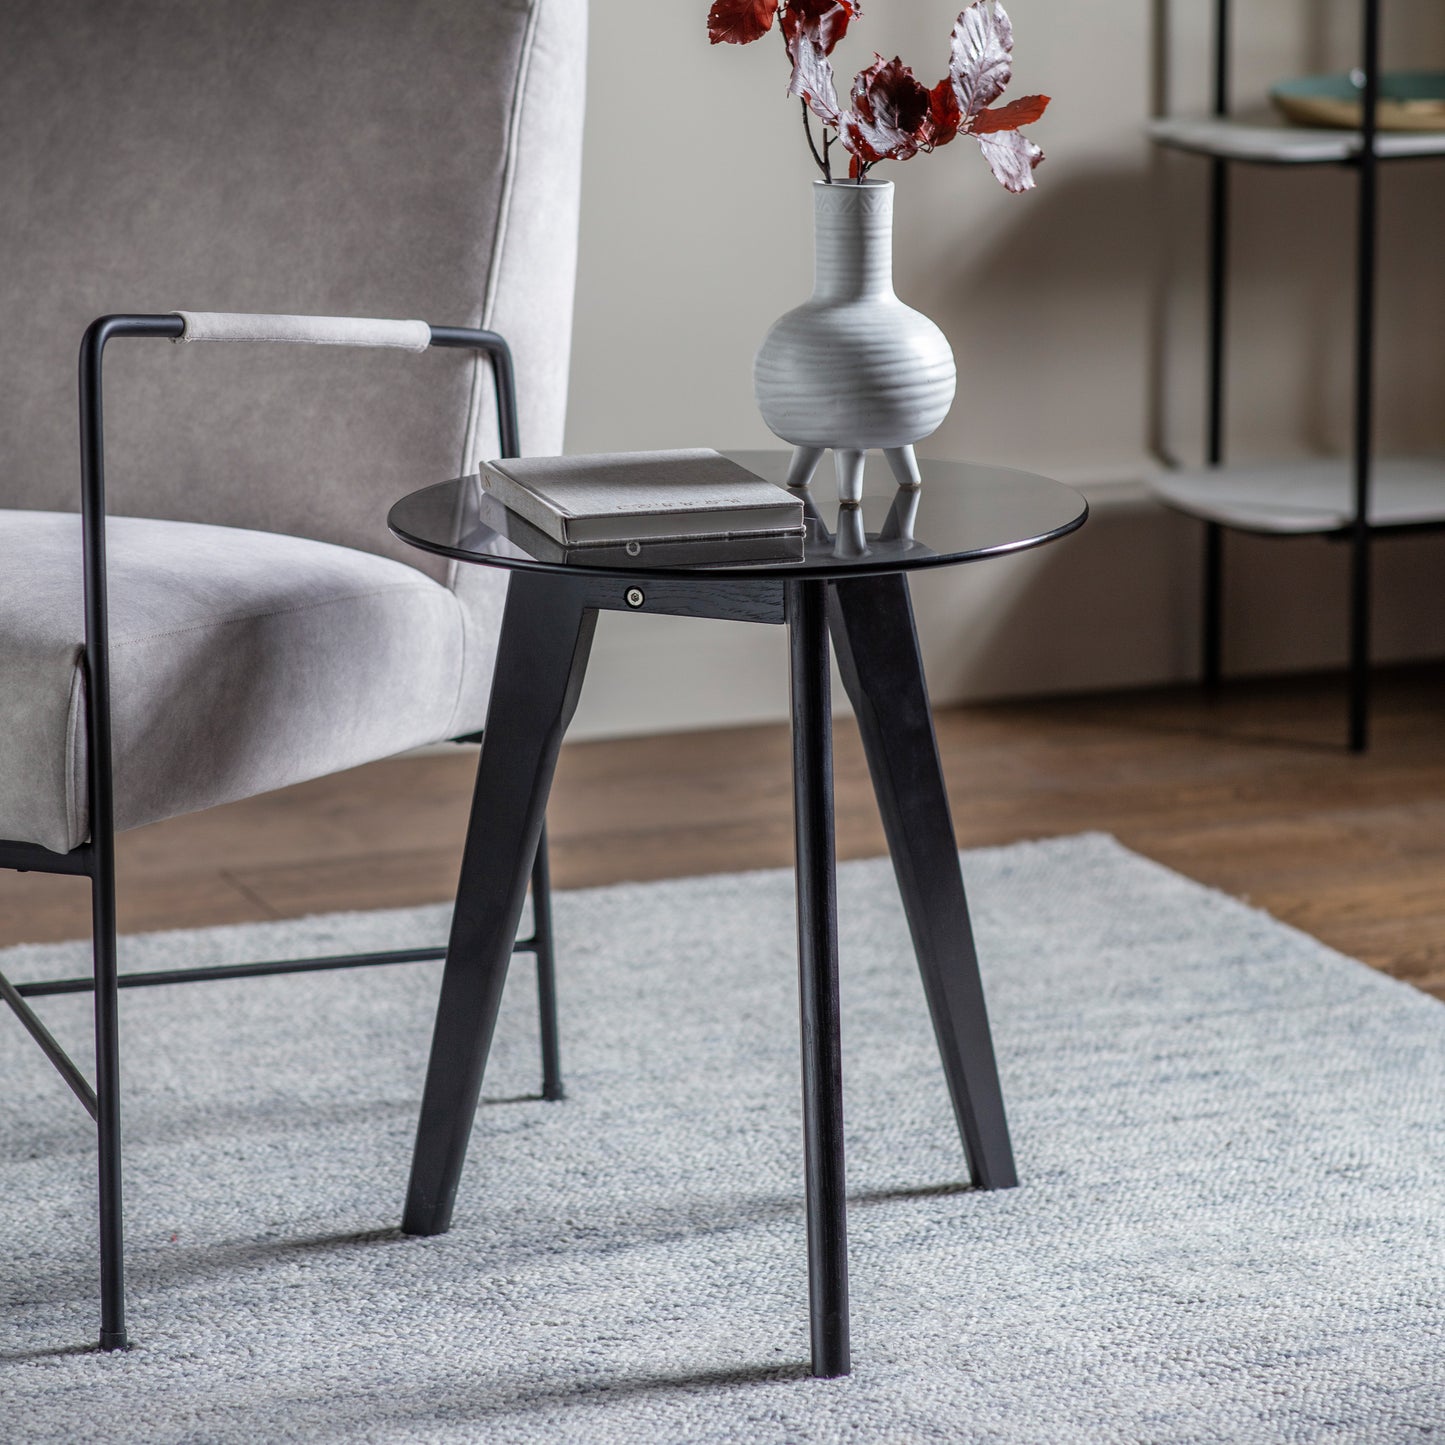 A Black Round Side Table with a vase on top, perfect for interior decor and home furniture.